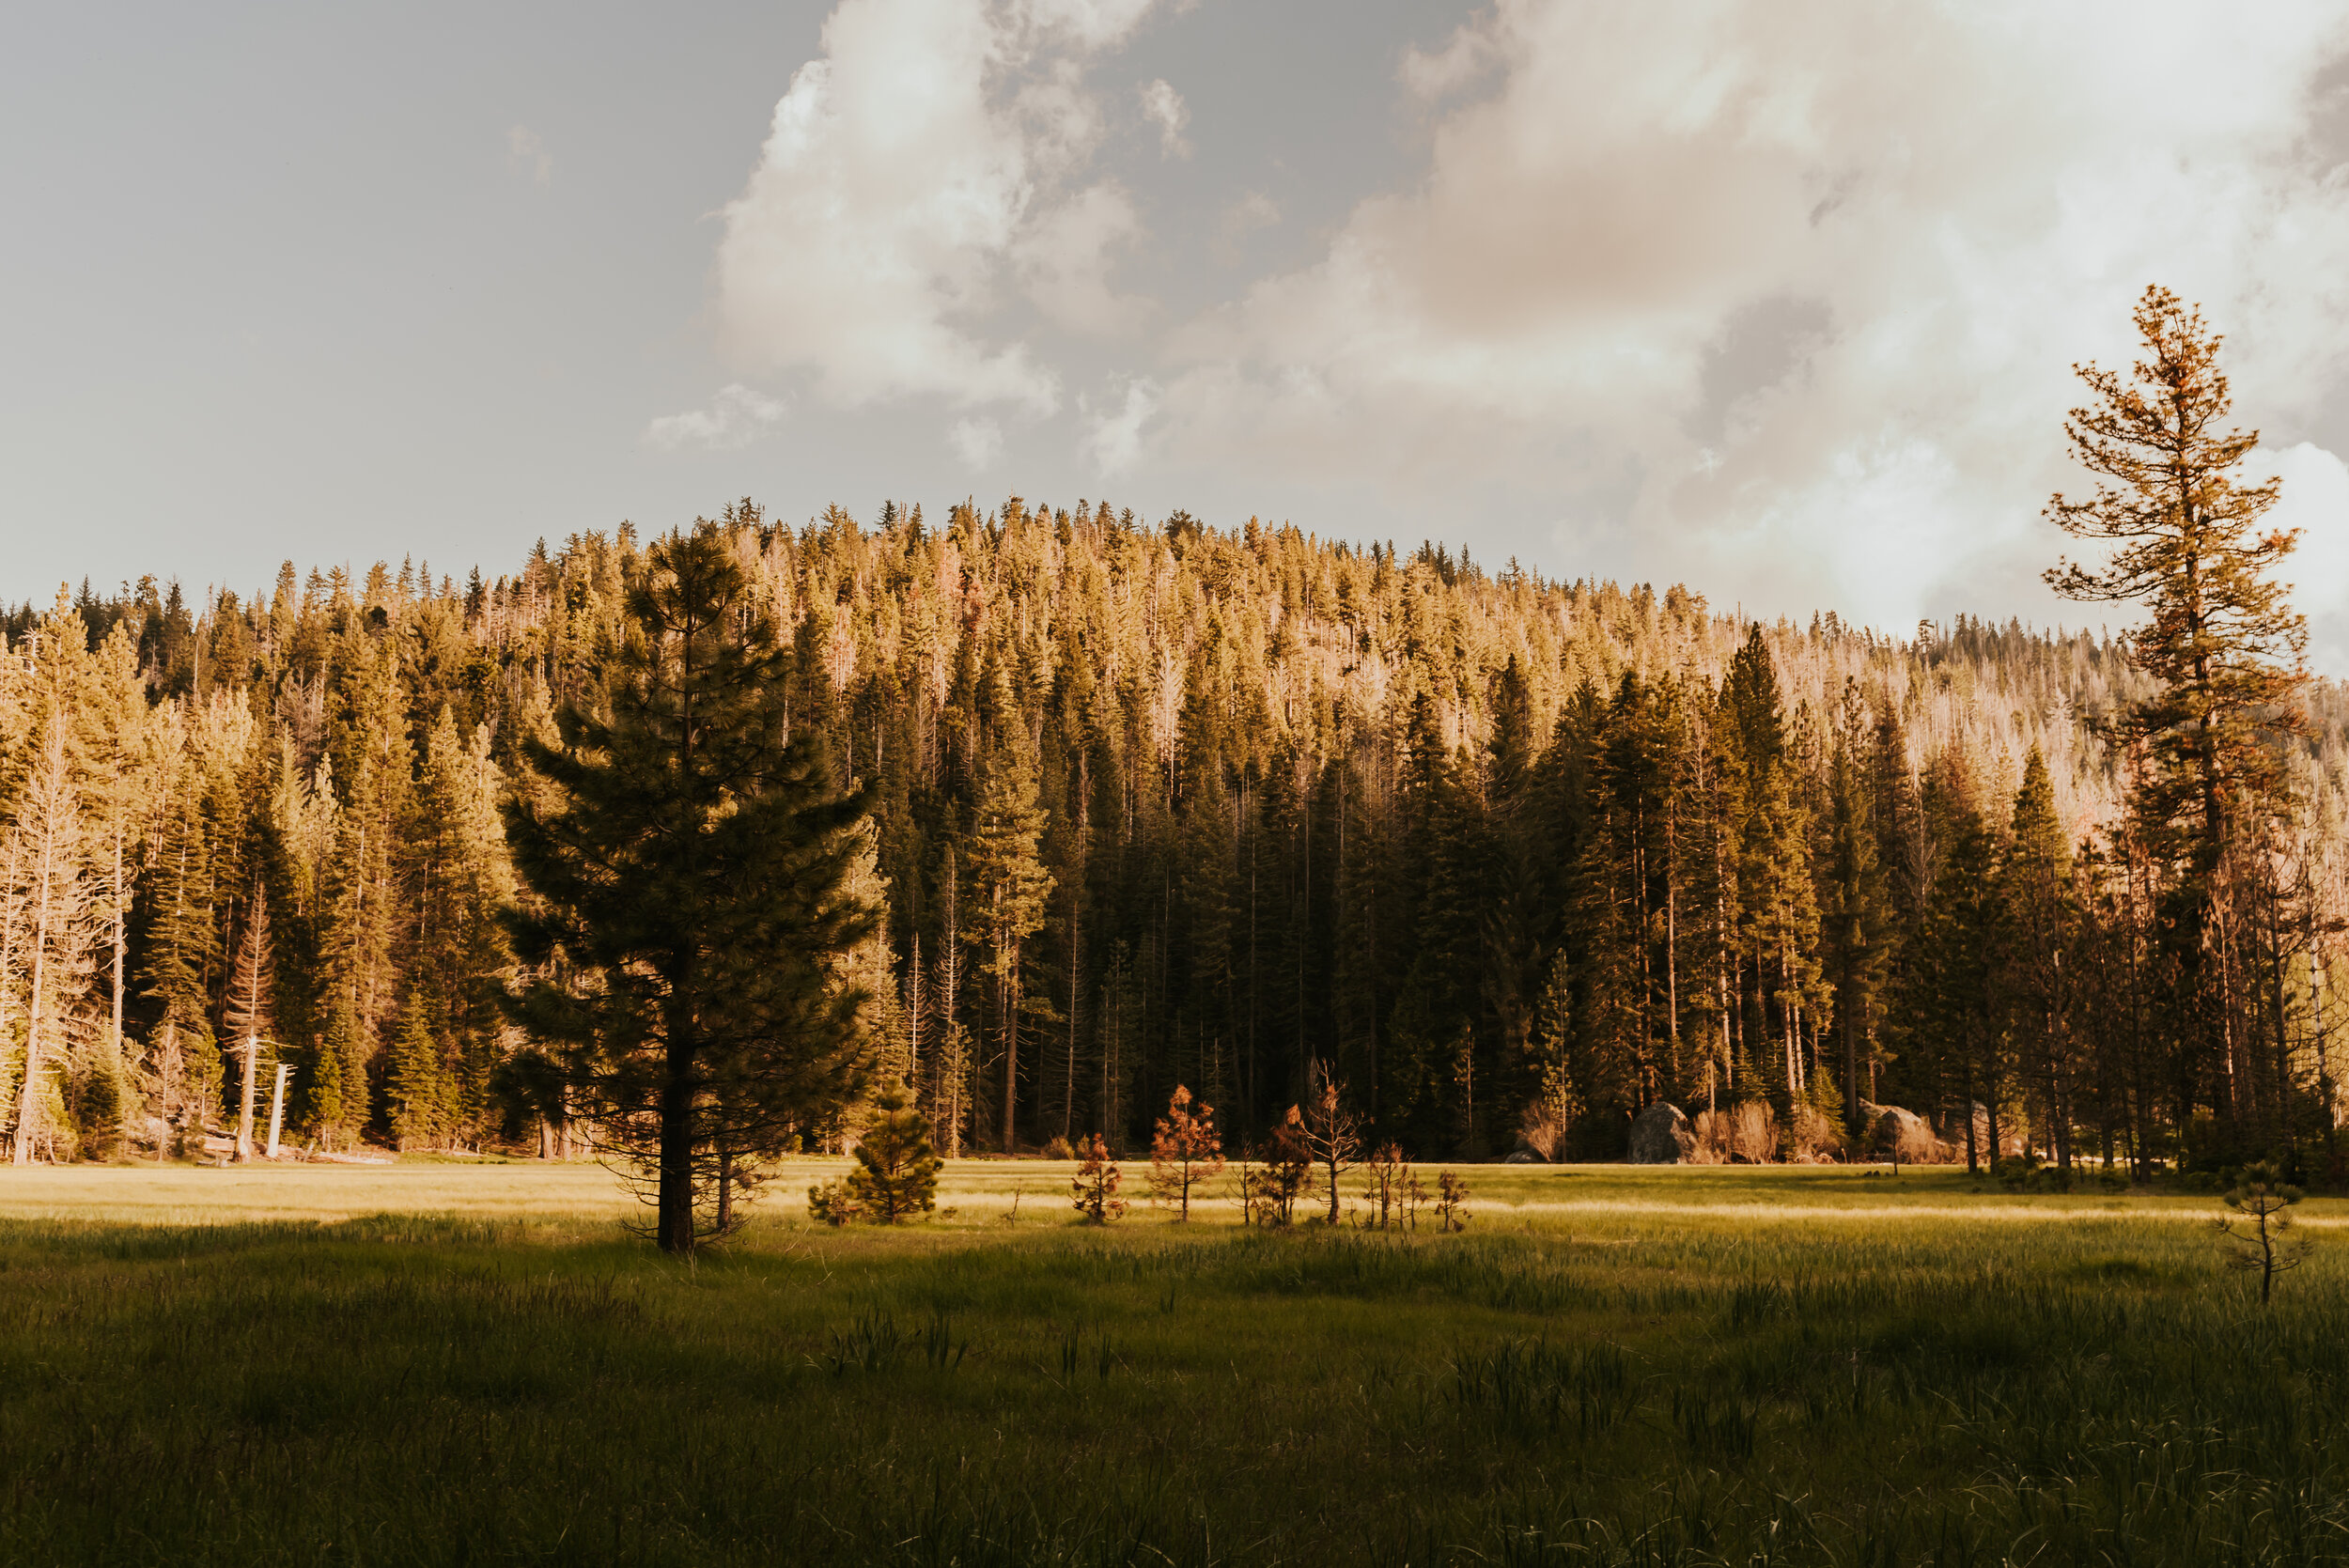 Sequoia National Park Elopement | California Elopement Photographer | Sequoia and Kings Canyon National Park | Adventure Elopement | National Park Wedding